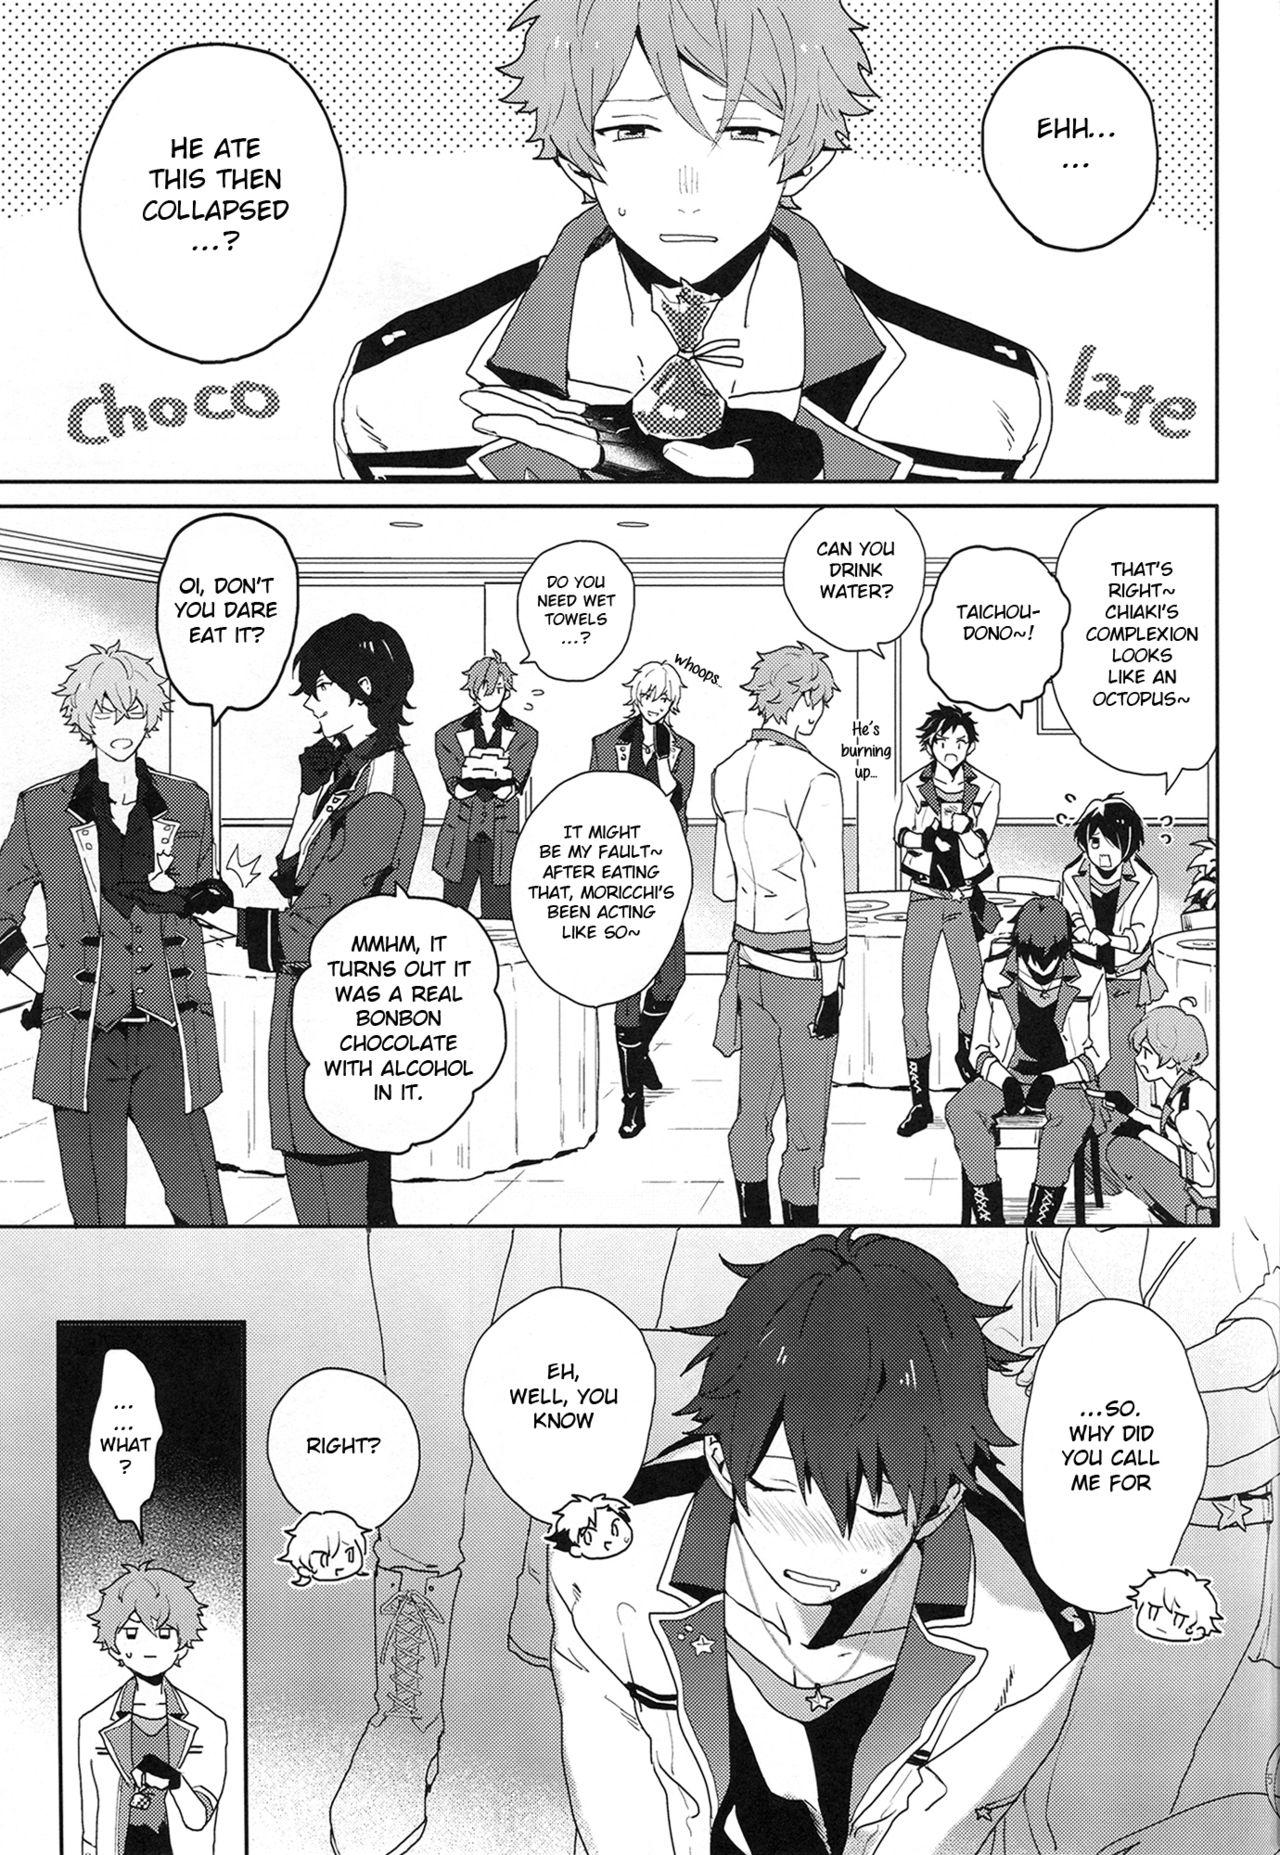 Oral Porn After the Holiday Party! - Ensemble stars Free Fuck - Page 5